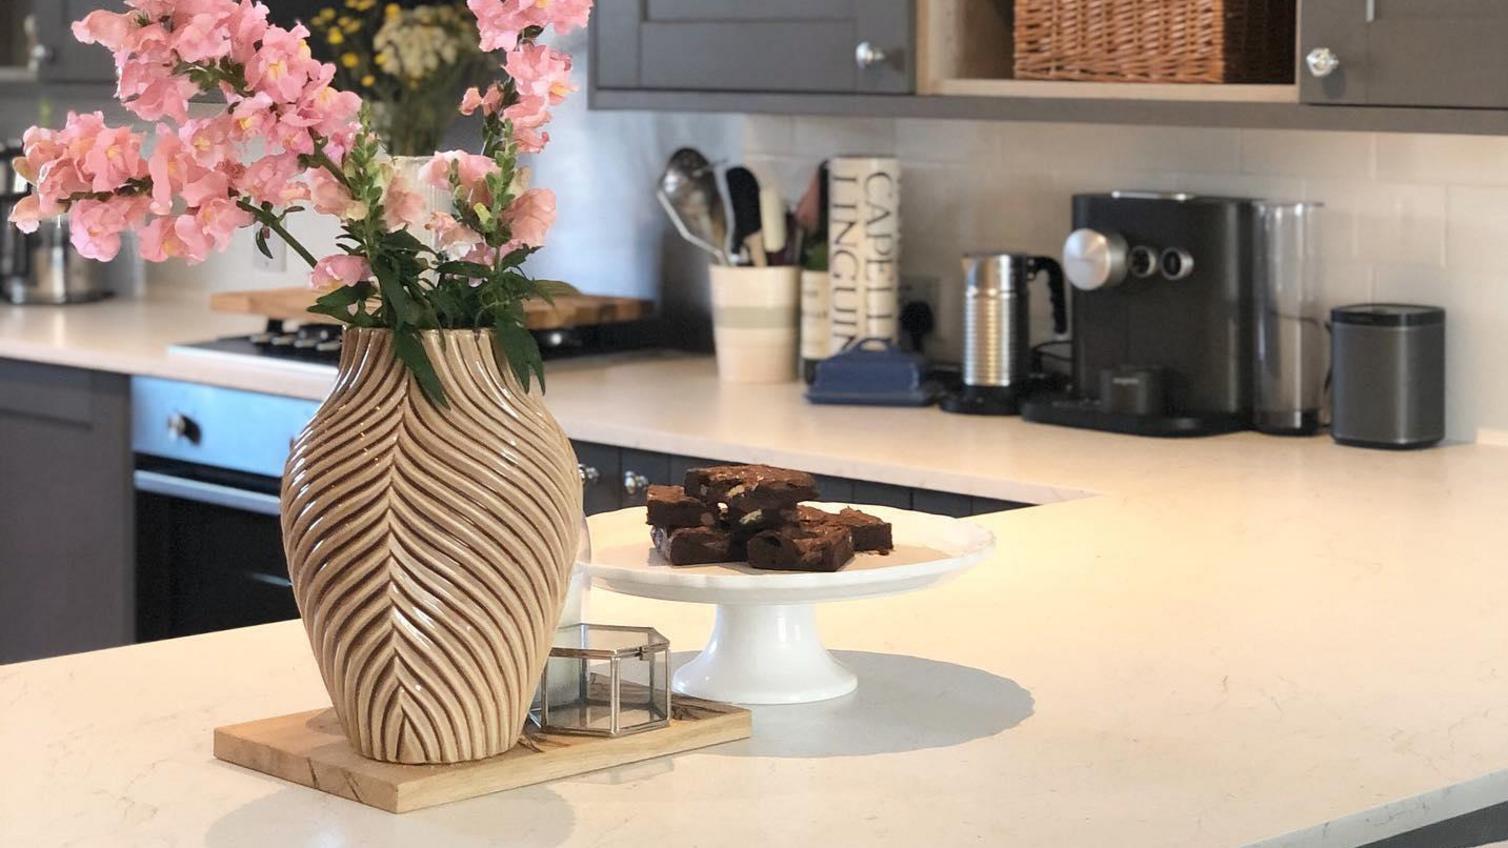 White marble worktop in a breakfast bar layout, with dark grey shaker cupboards, bouquet of flowers and brownies on display.